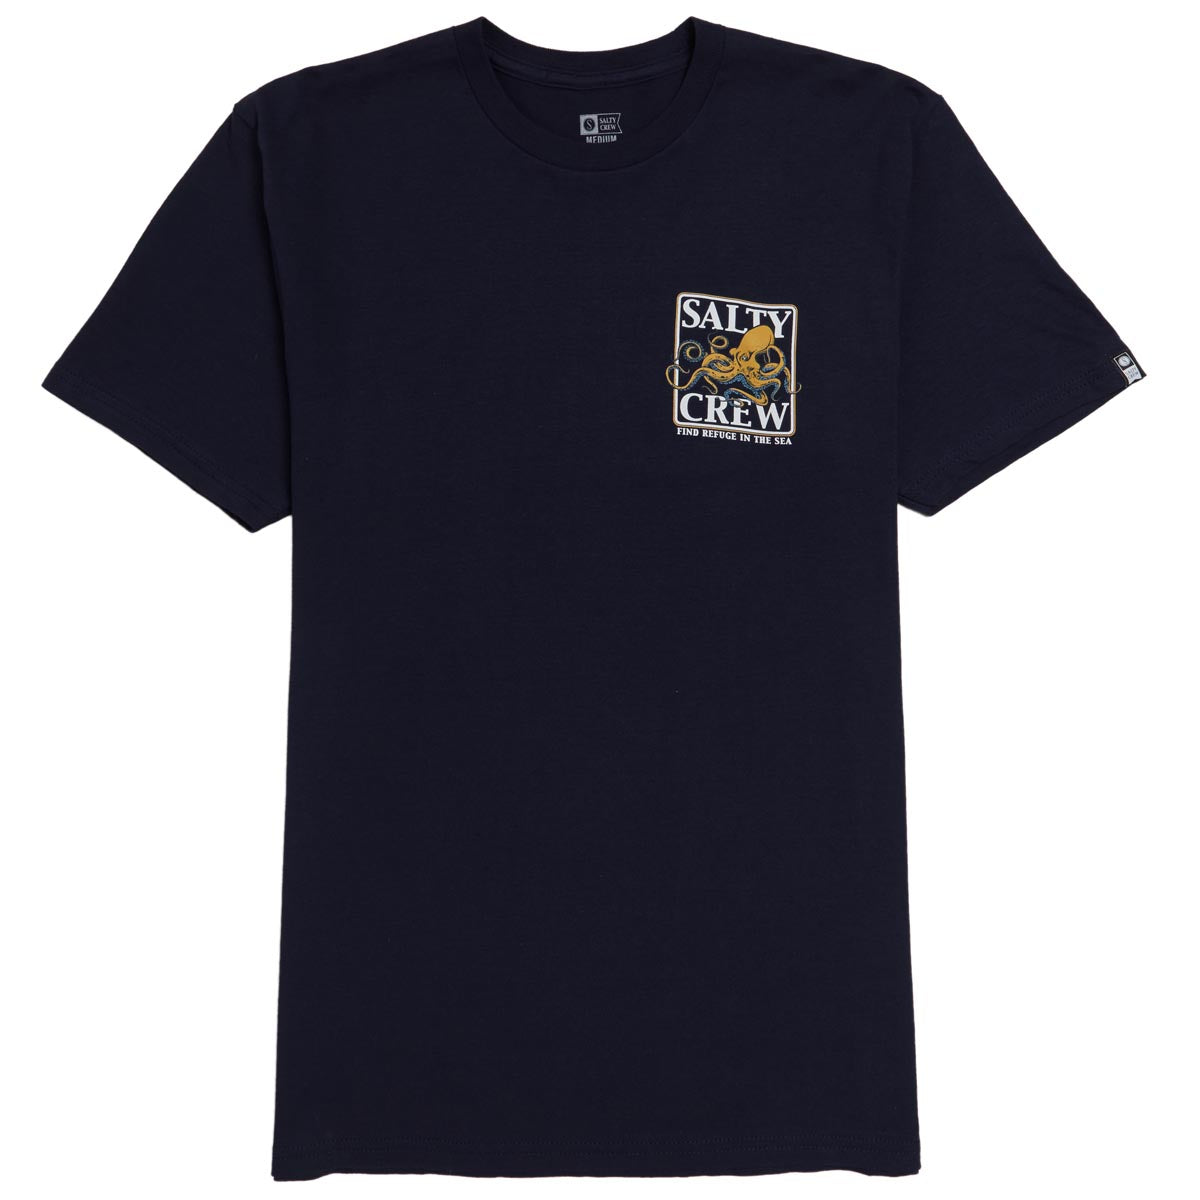 Salty Crew Ink Slinger Classic T-Shirt - Navy image 2